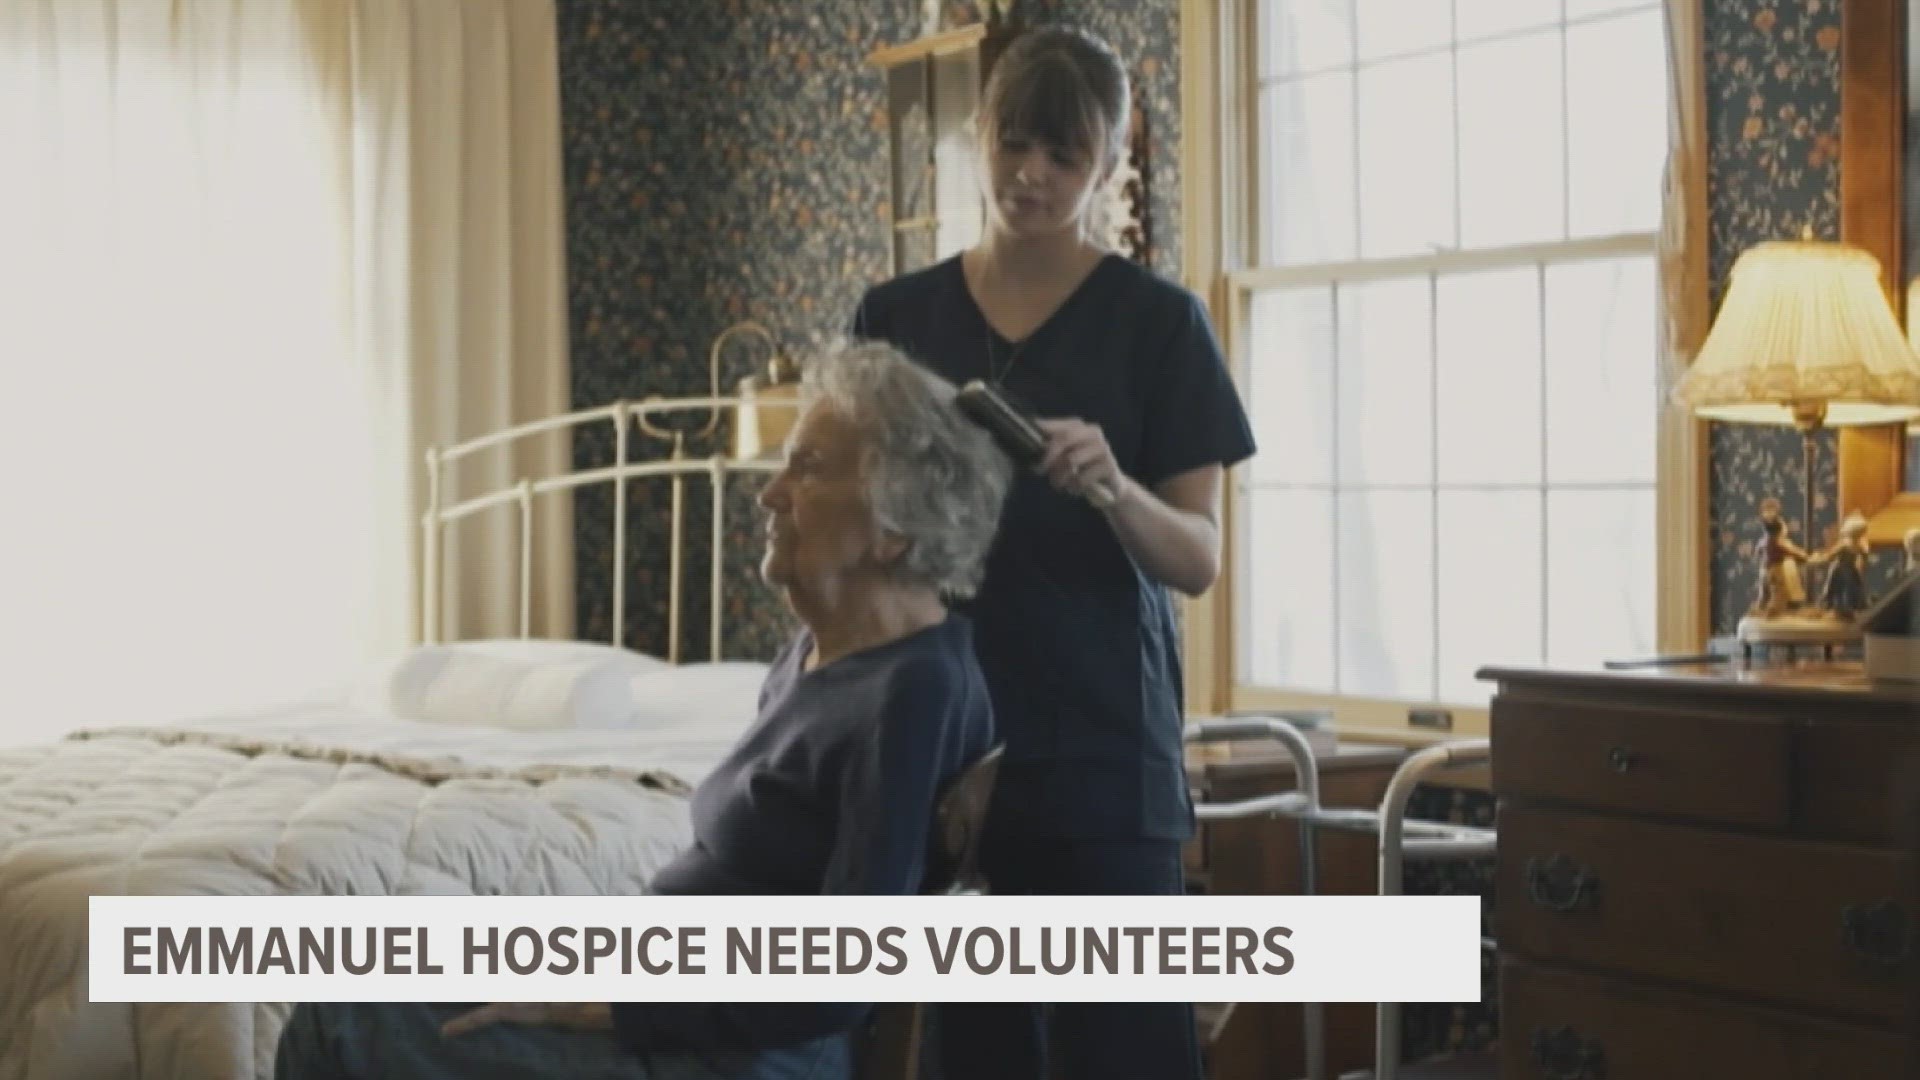 Emmanuel Hospice is looking for people to offer companionship and comfort to patients.